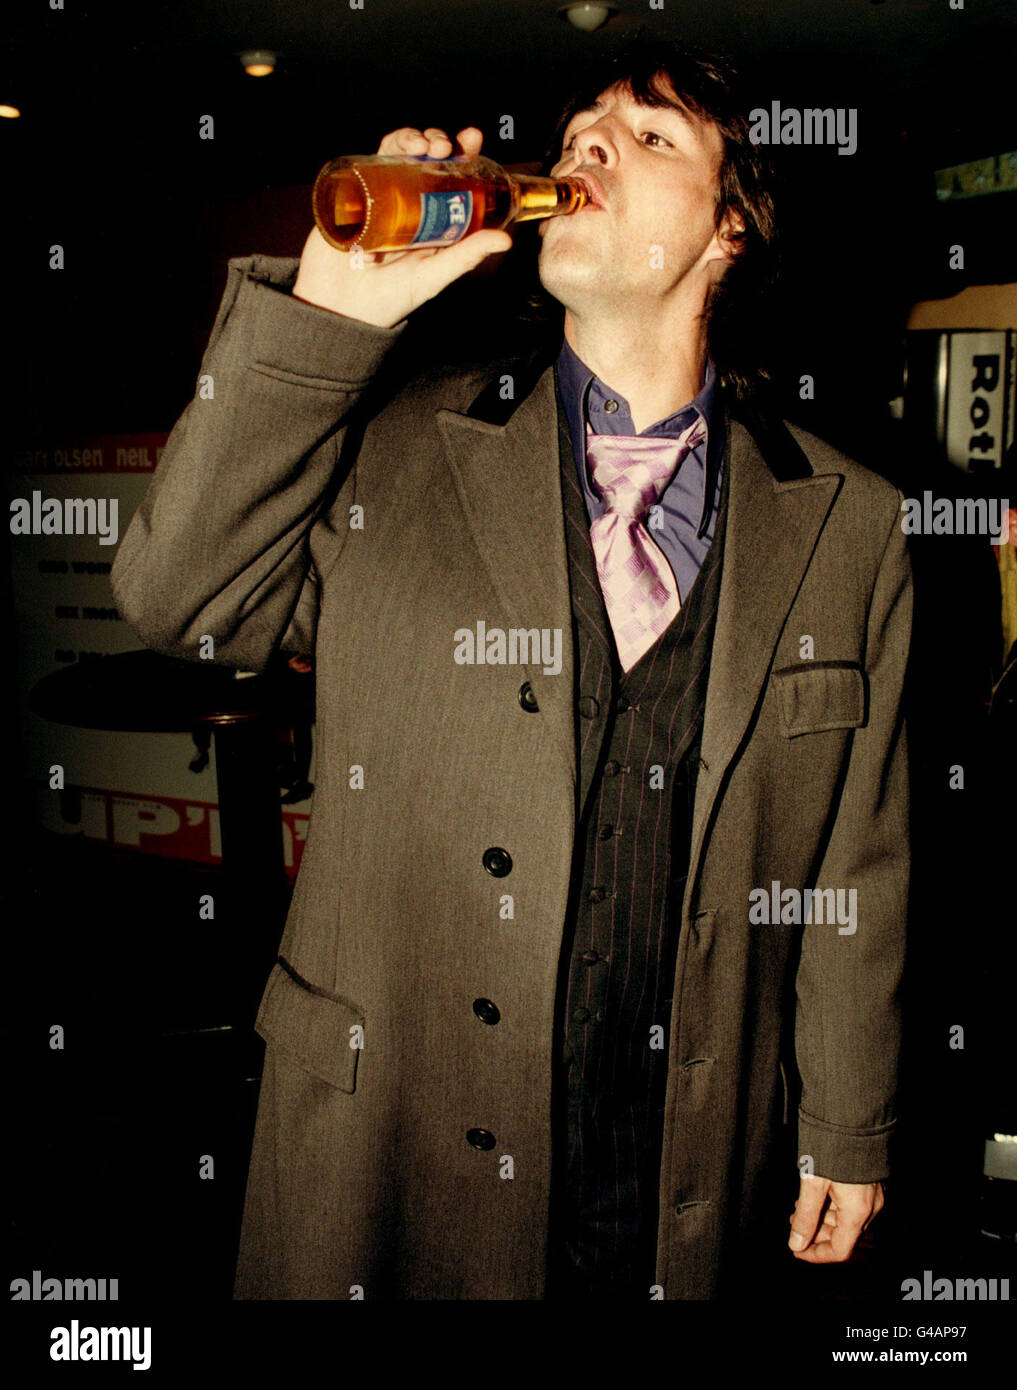 PA NEWS PHOTO 21/01/98 NEIL MORRISSEY AT A POST PREMIERE PARTY FOR THE RELEASE OF HIS NEW FILM 'UP 'N' UNDER' AT THE 'SPORTS CAFE' IN LONDON Stock Photo